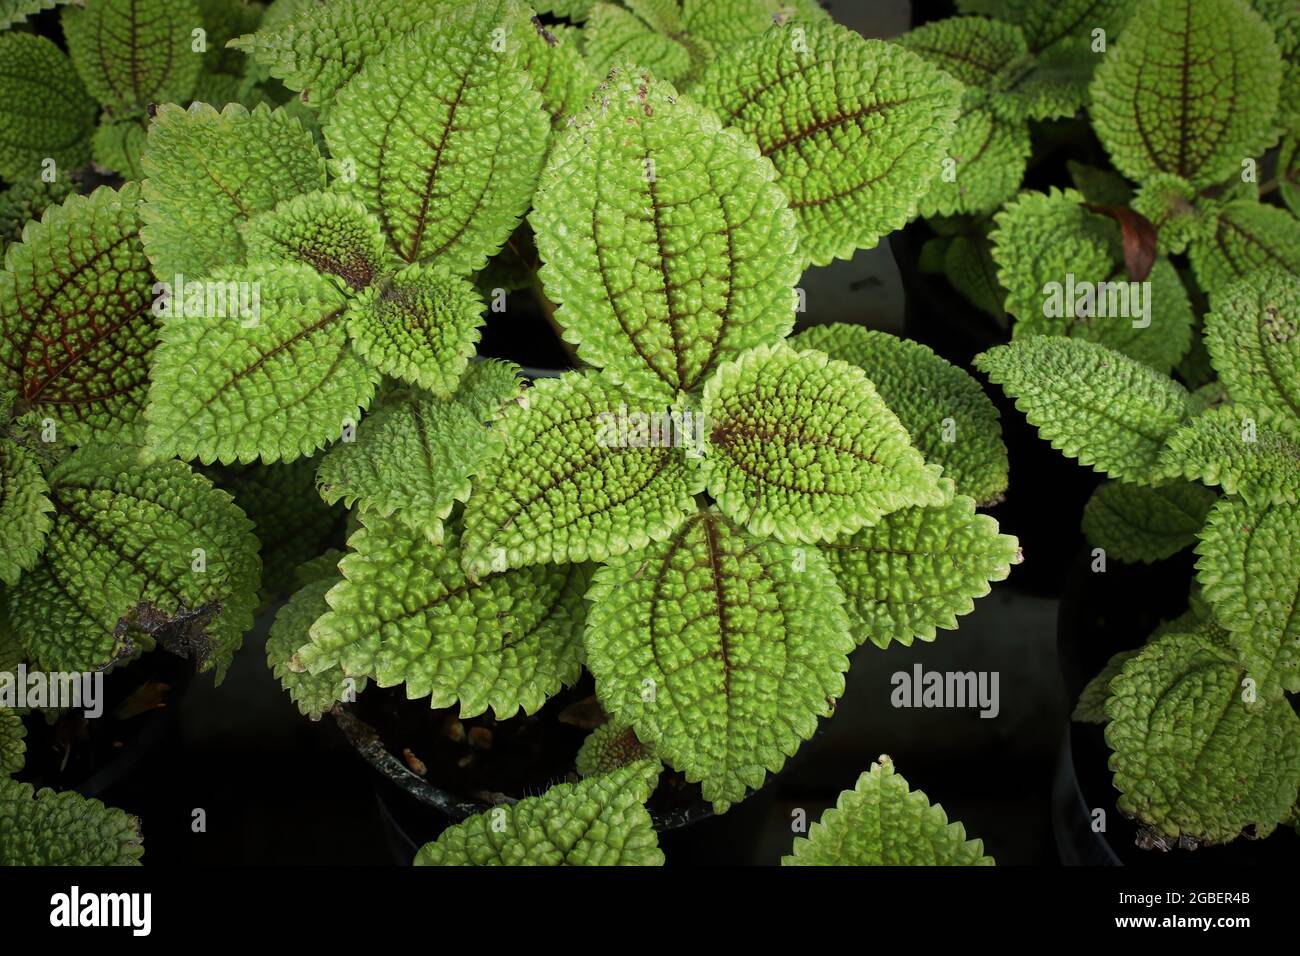 Closeup of many Friendship houseplants with bumpy leaves Stock Photo